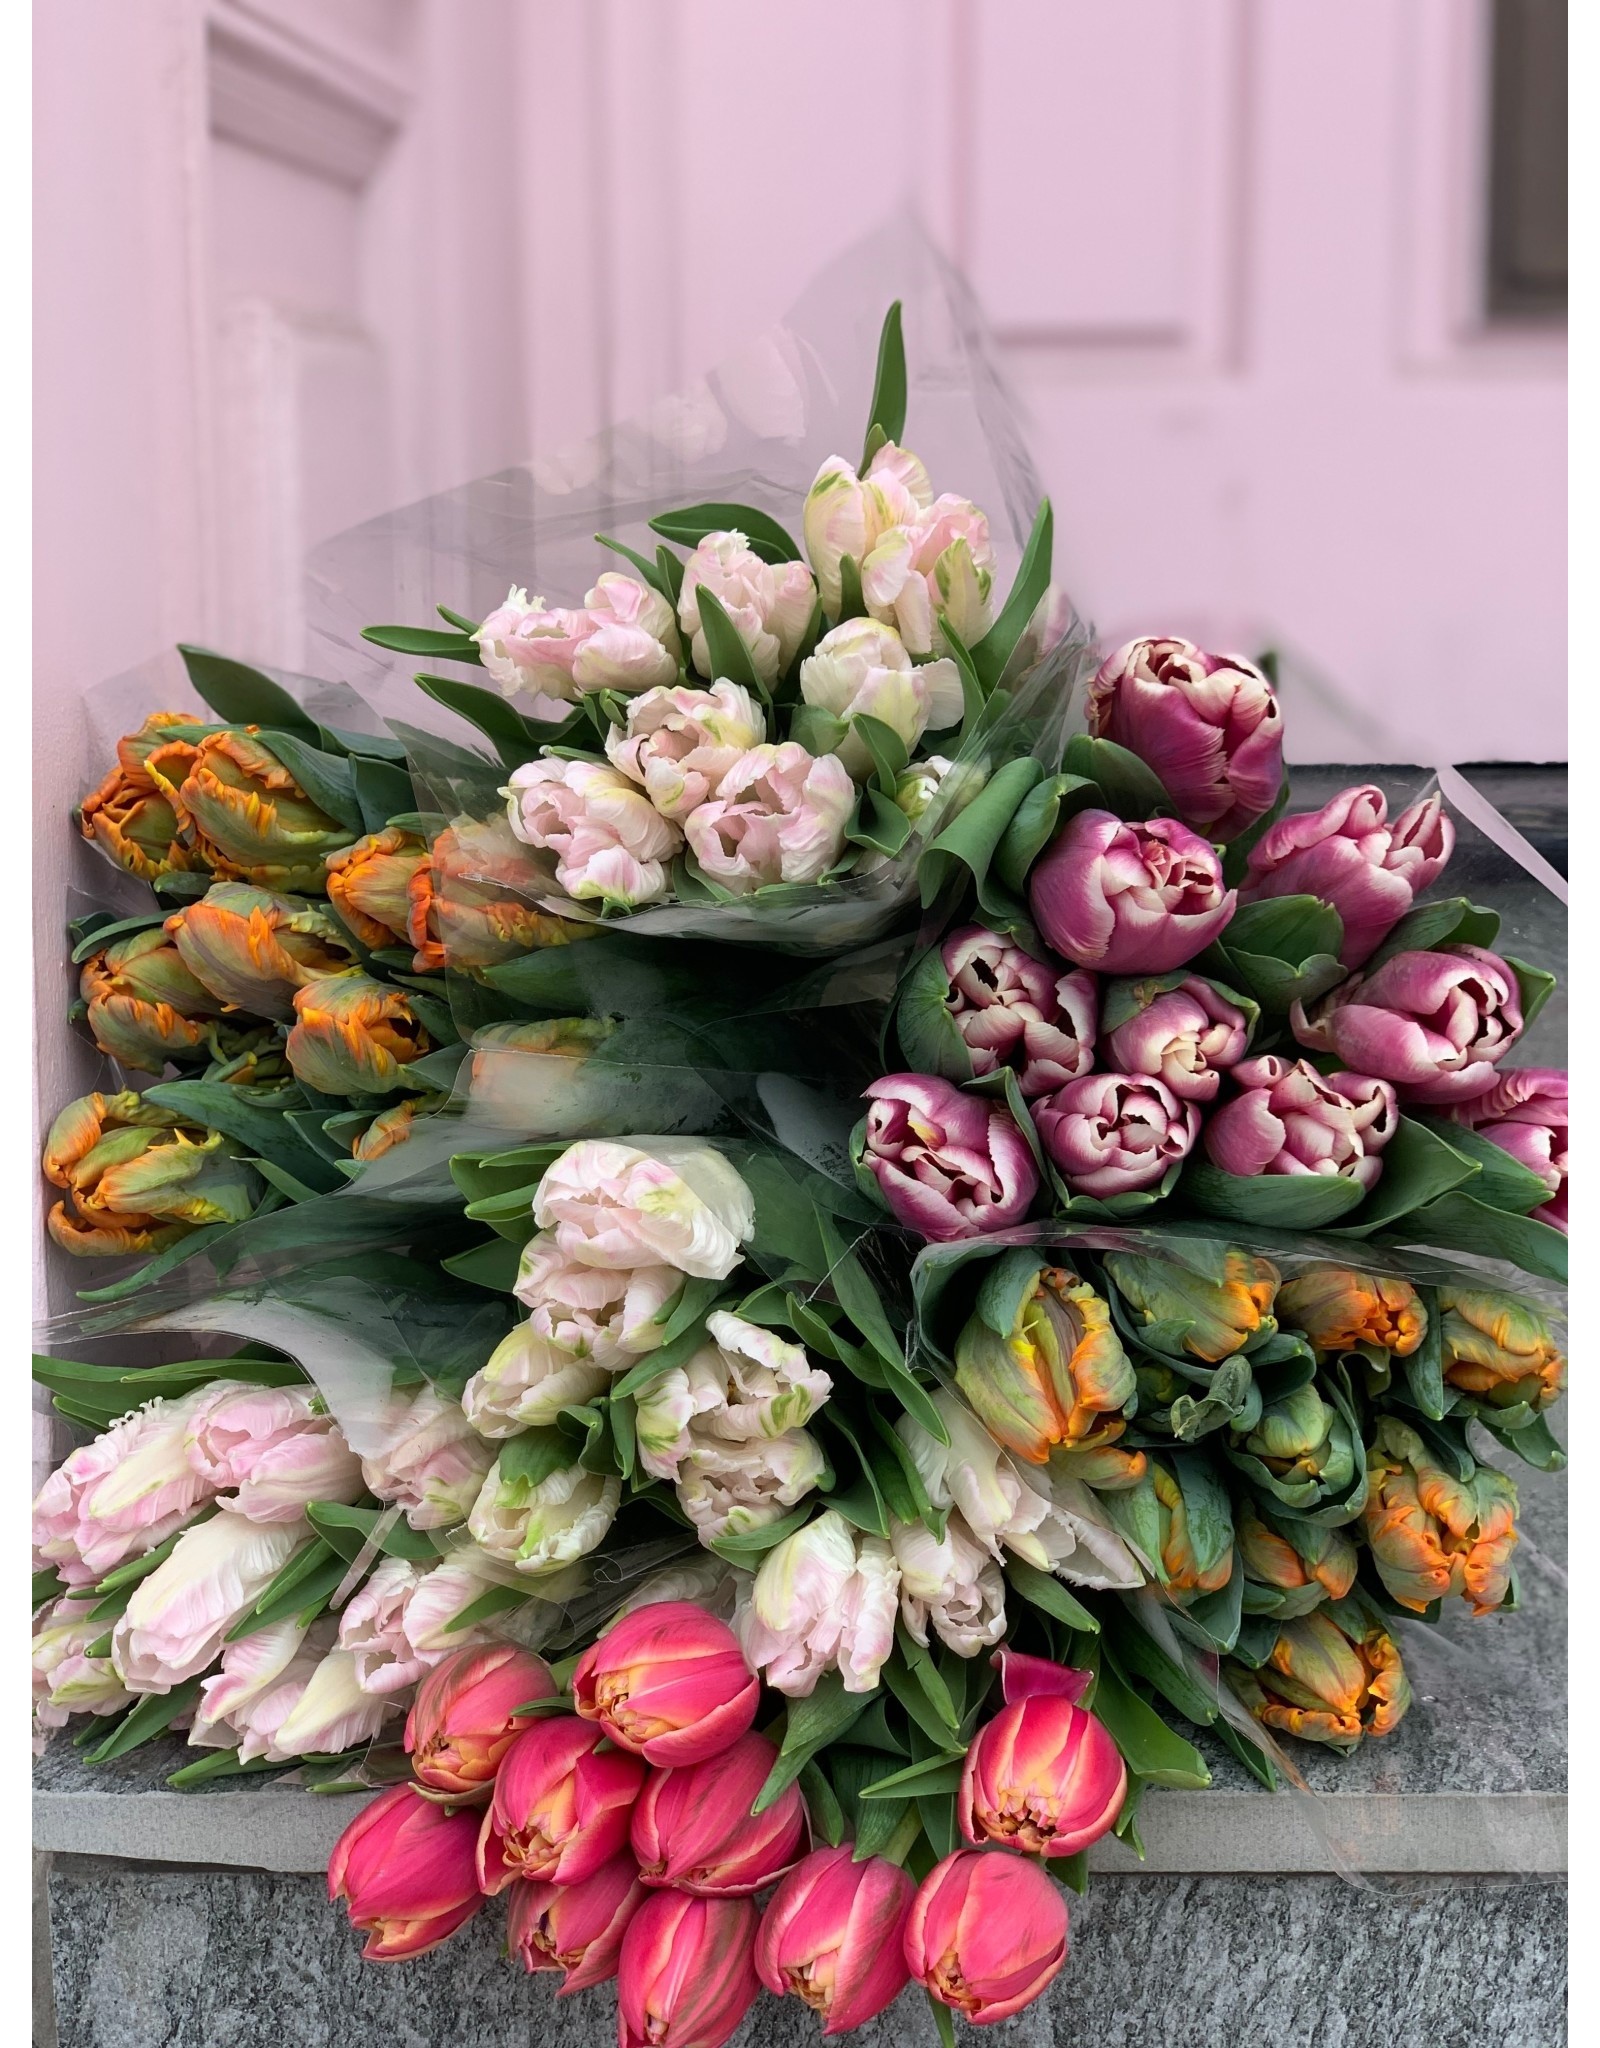 Junebug Mother's Day Specialty Tulip Bouquet